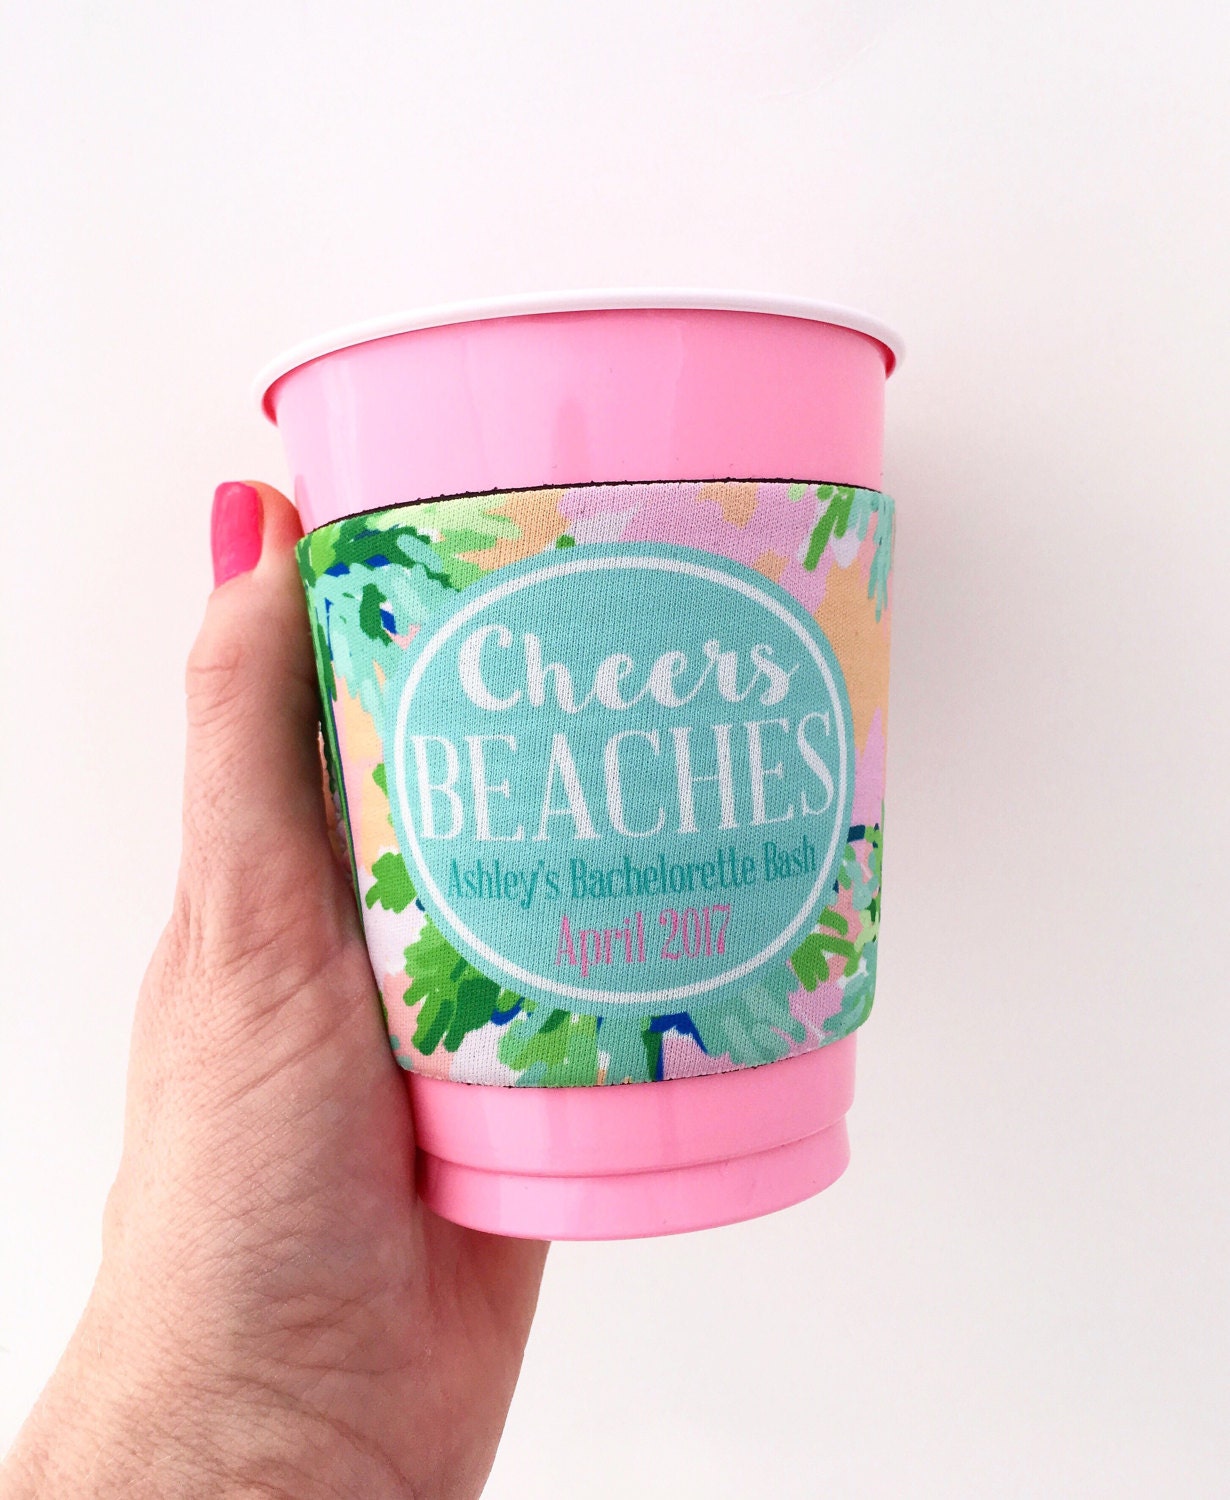 Cheers Beaches/Florida Preppy Palms Bachelorette Party Party Cup Huggers/Beverage Insulator